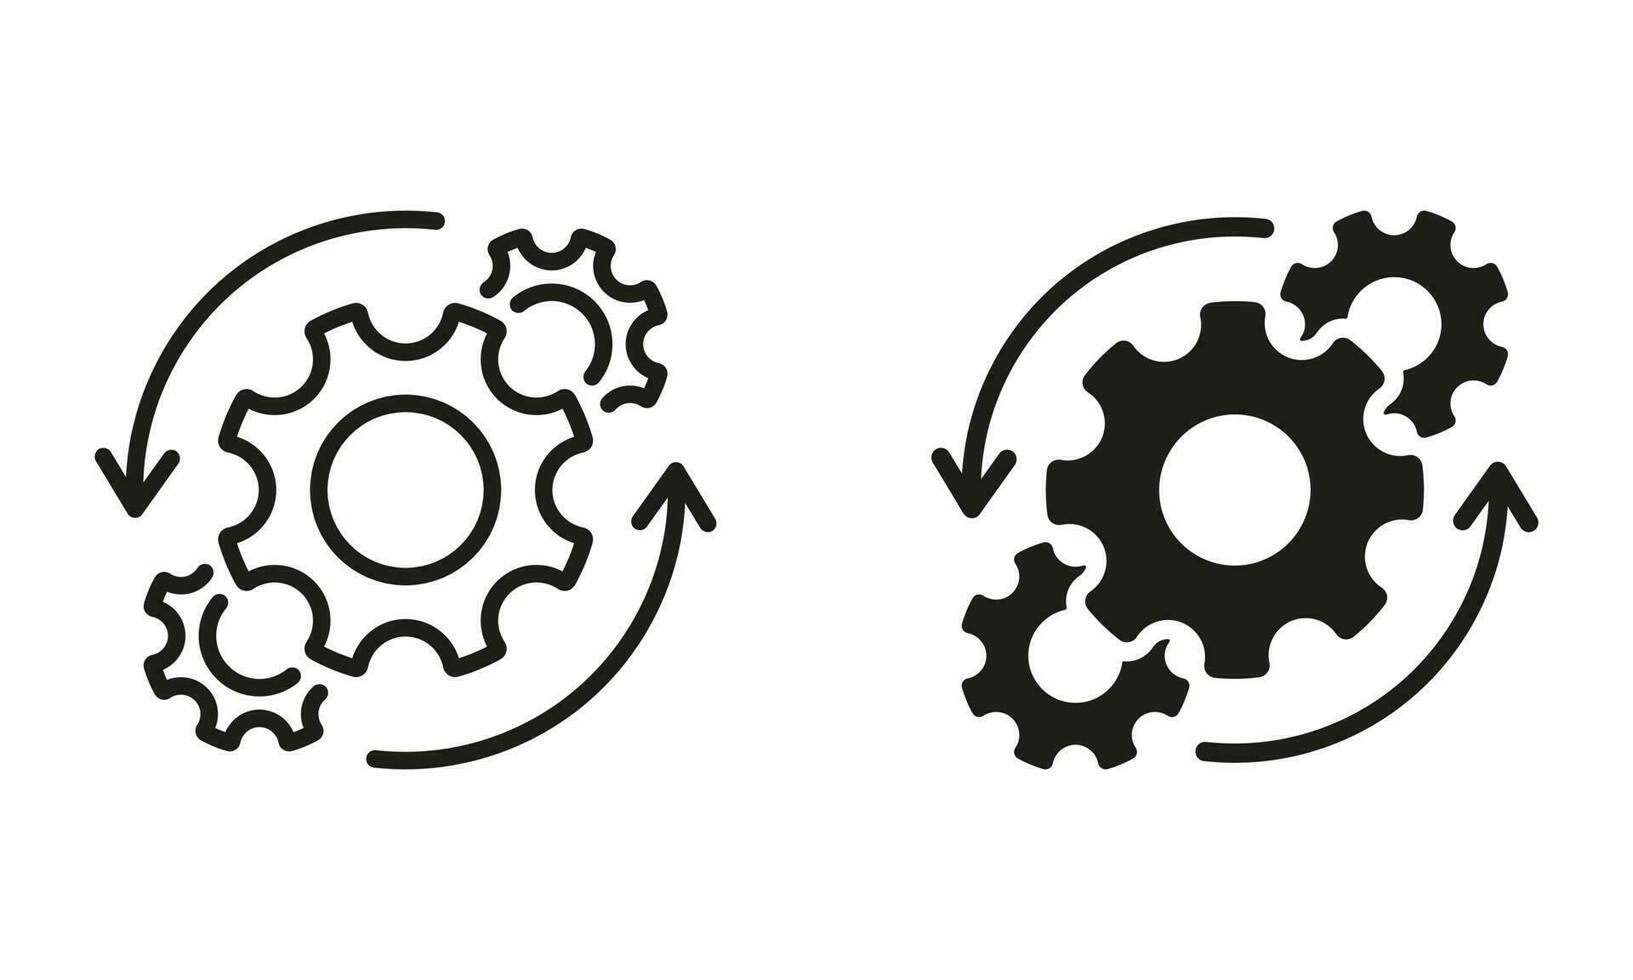 Gear and Round Arrow Business Technology Process Black Symbol Collection. Workflow Cog Wheel Symbol Pictogram. Circle Gear Work Progress Line and Silhouette Icon Set. Isolated Vector Illustration.